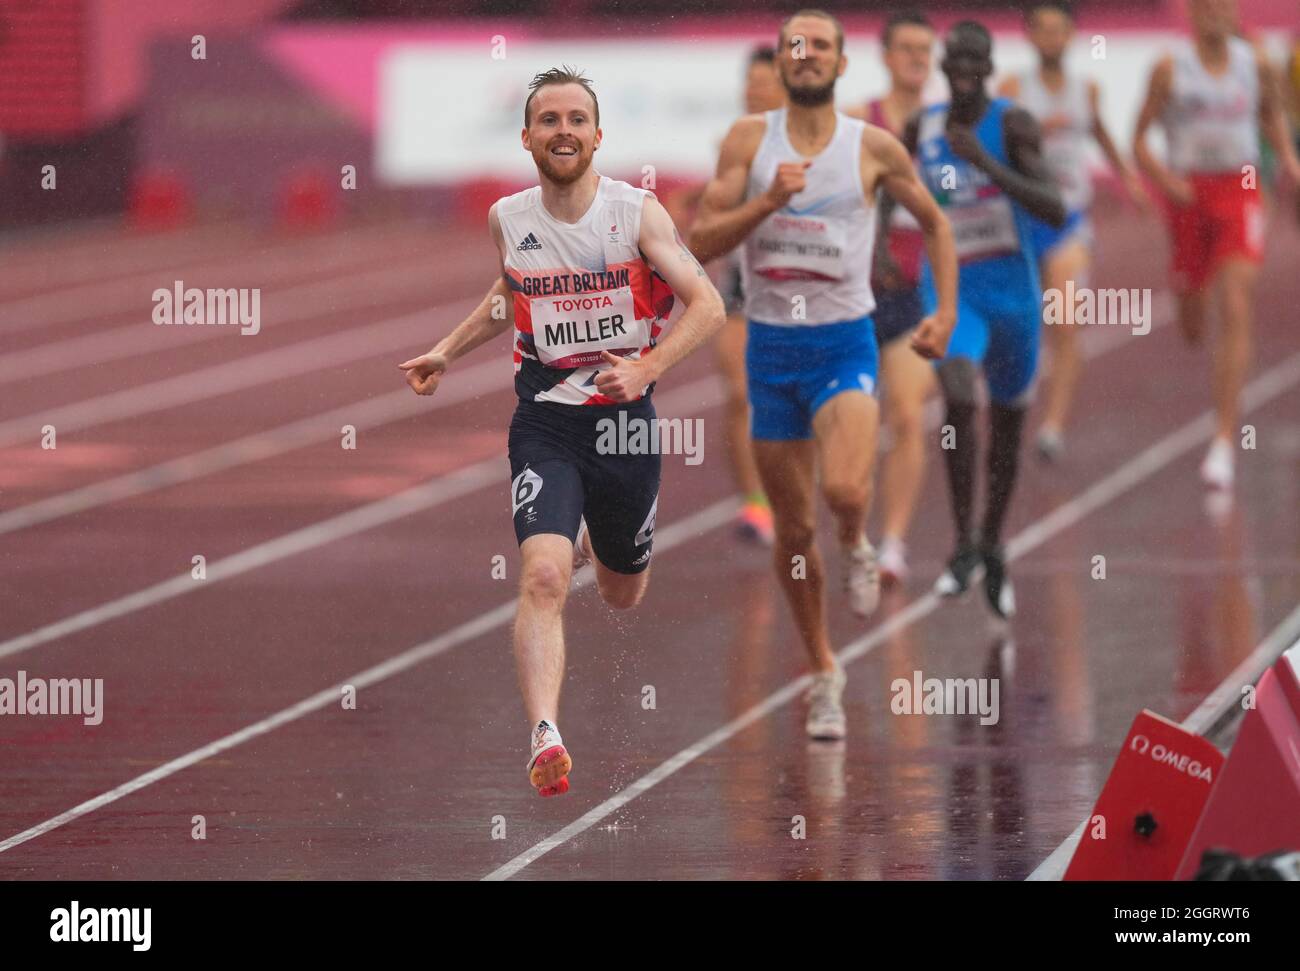 Tokyo, Japan. 3rd Sep 2021. Tokyo, Japan. 3rd Sep 2021. September 3, 2021: MILLER Owen Miller from winning gold at 1500m during athletics at the Tokyo Paralympics, Tokyo Olympic Stadium, Tokyo, Japan. Kim Price/CSM Credit: Cal Sport Media/Alamy Live News Stock Photo